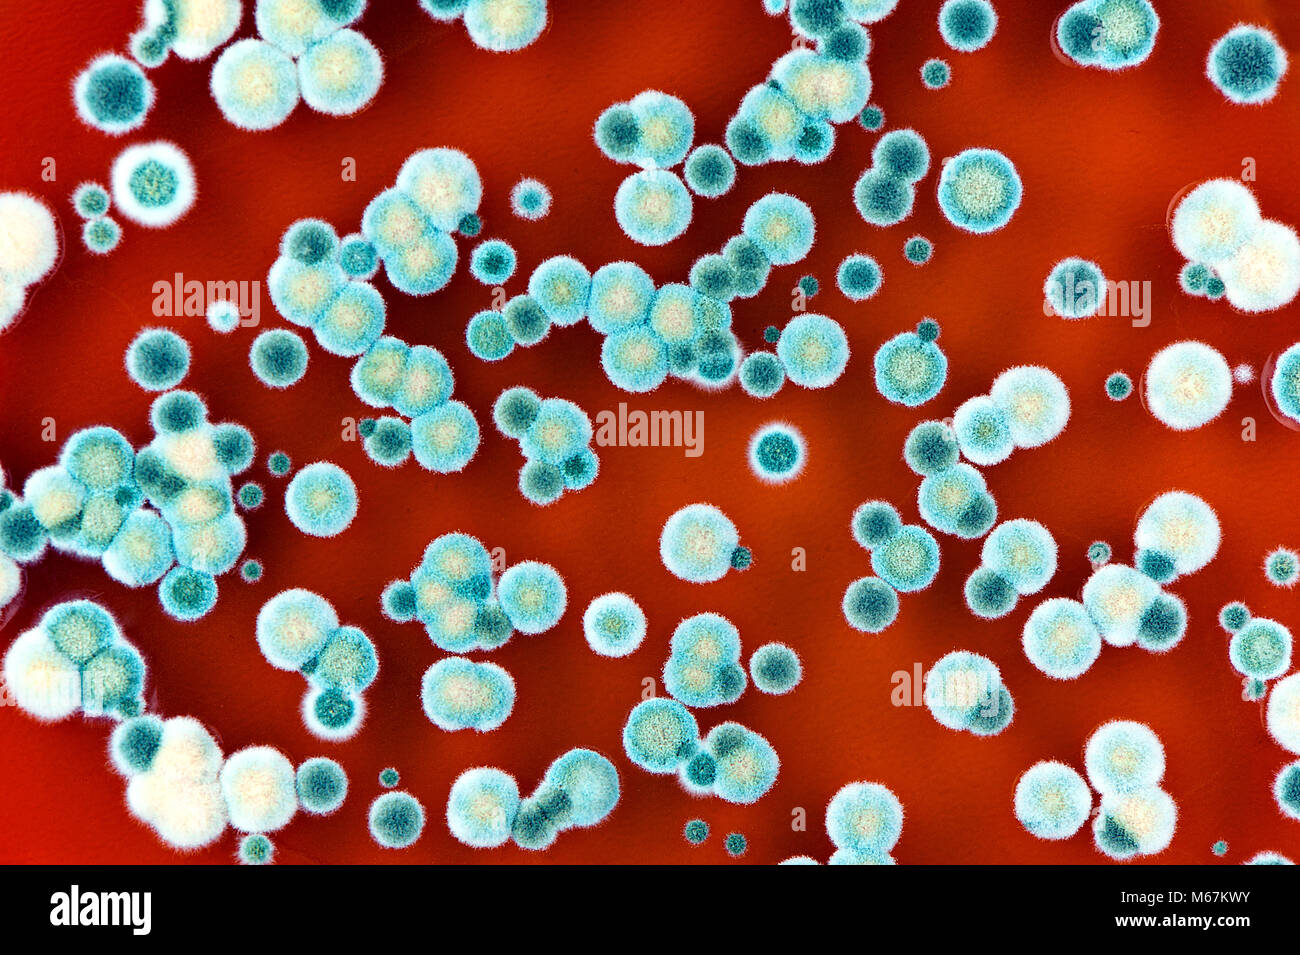 microbiology background made of colorful fungi and mold colonies. Surface of agar petri dish. Stock Photo